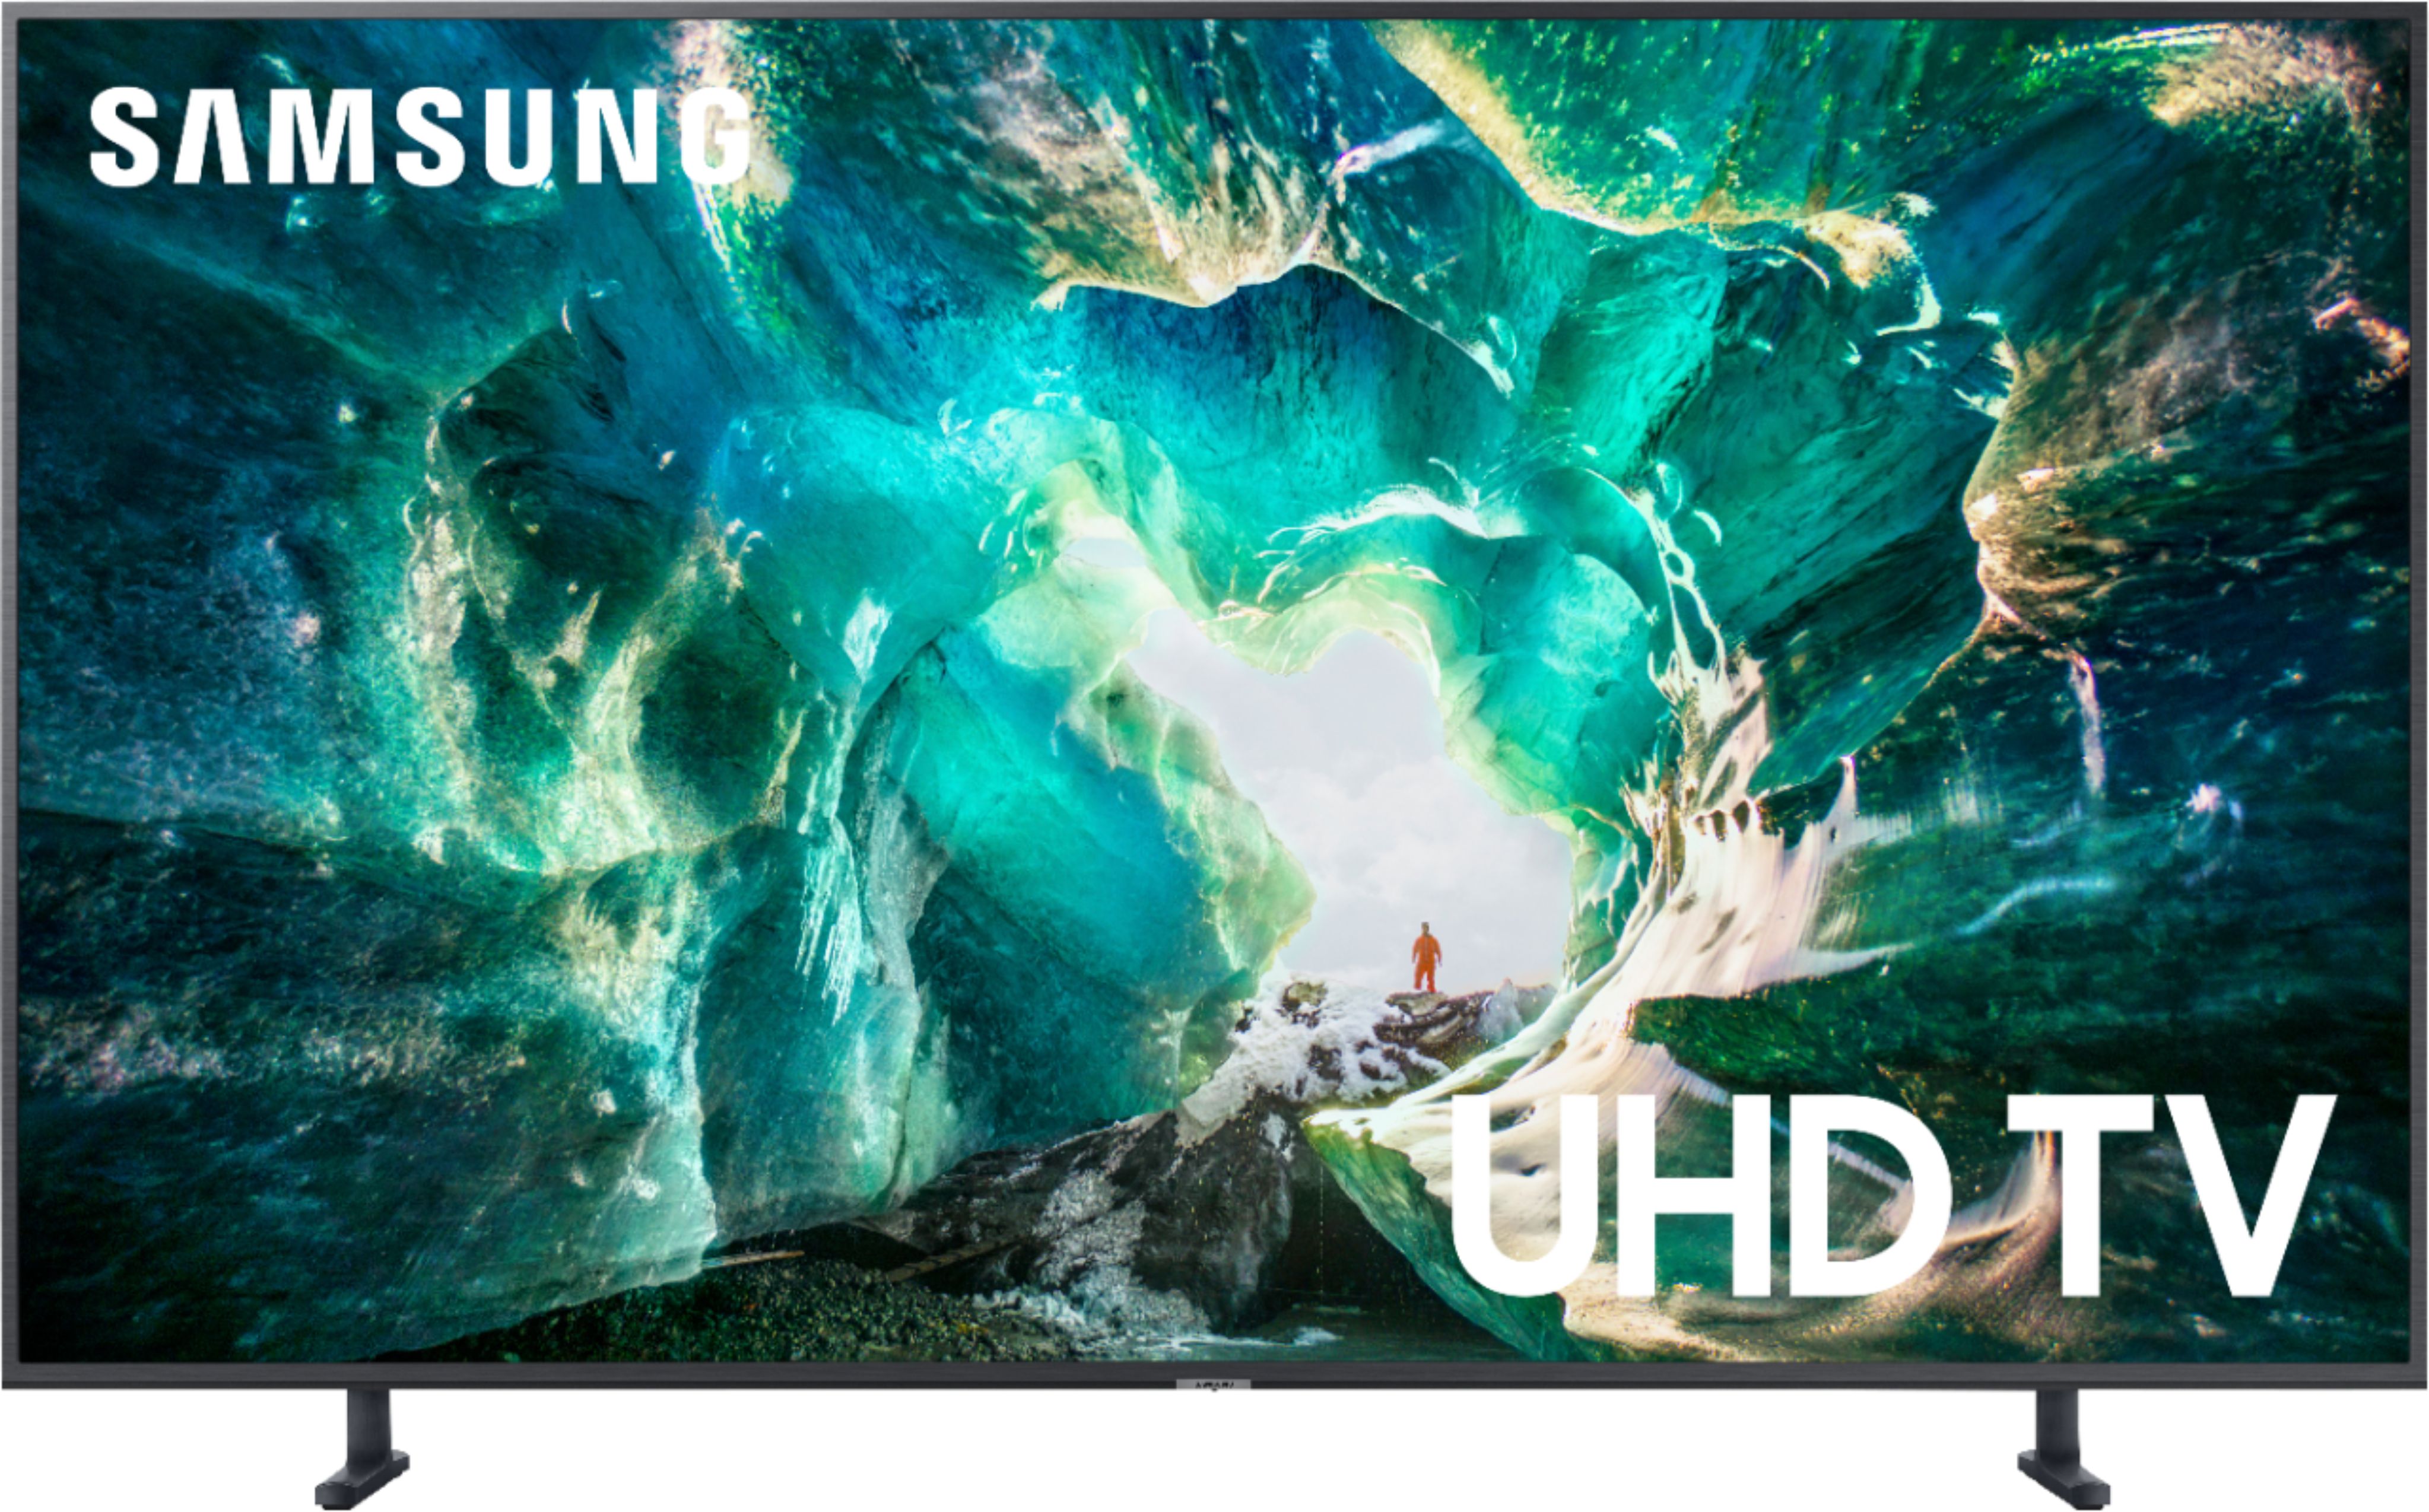 Samsung - 65" Class - LED - 8 Series - 2160p - Smart - 4K UHD TV with HDR